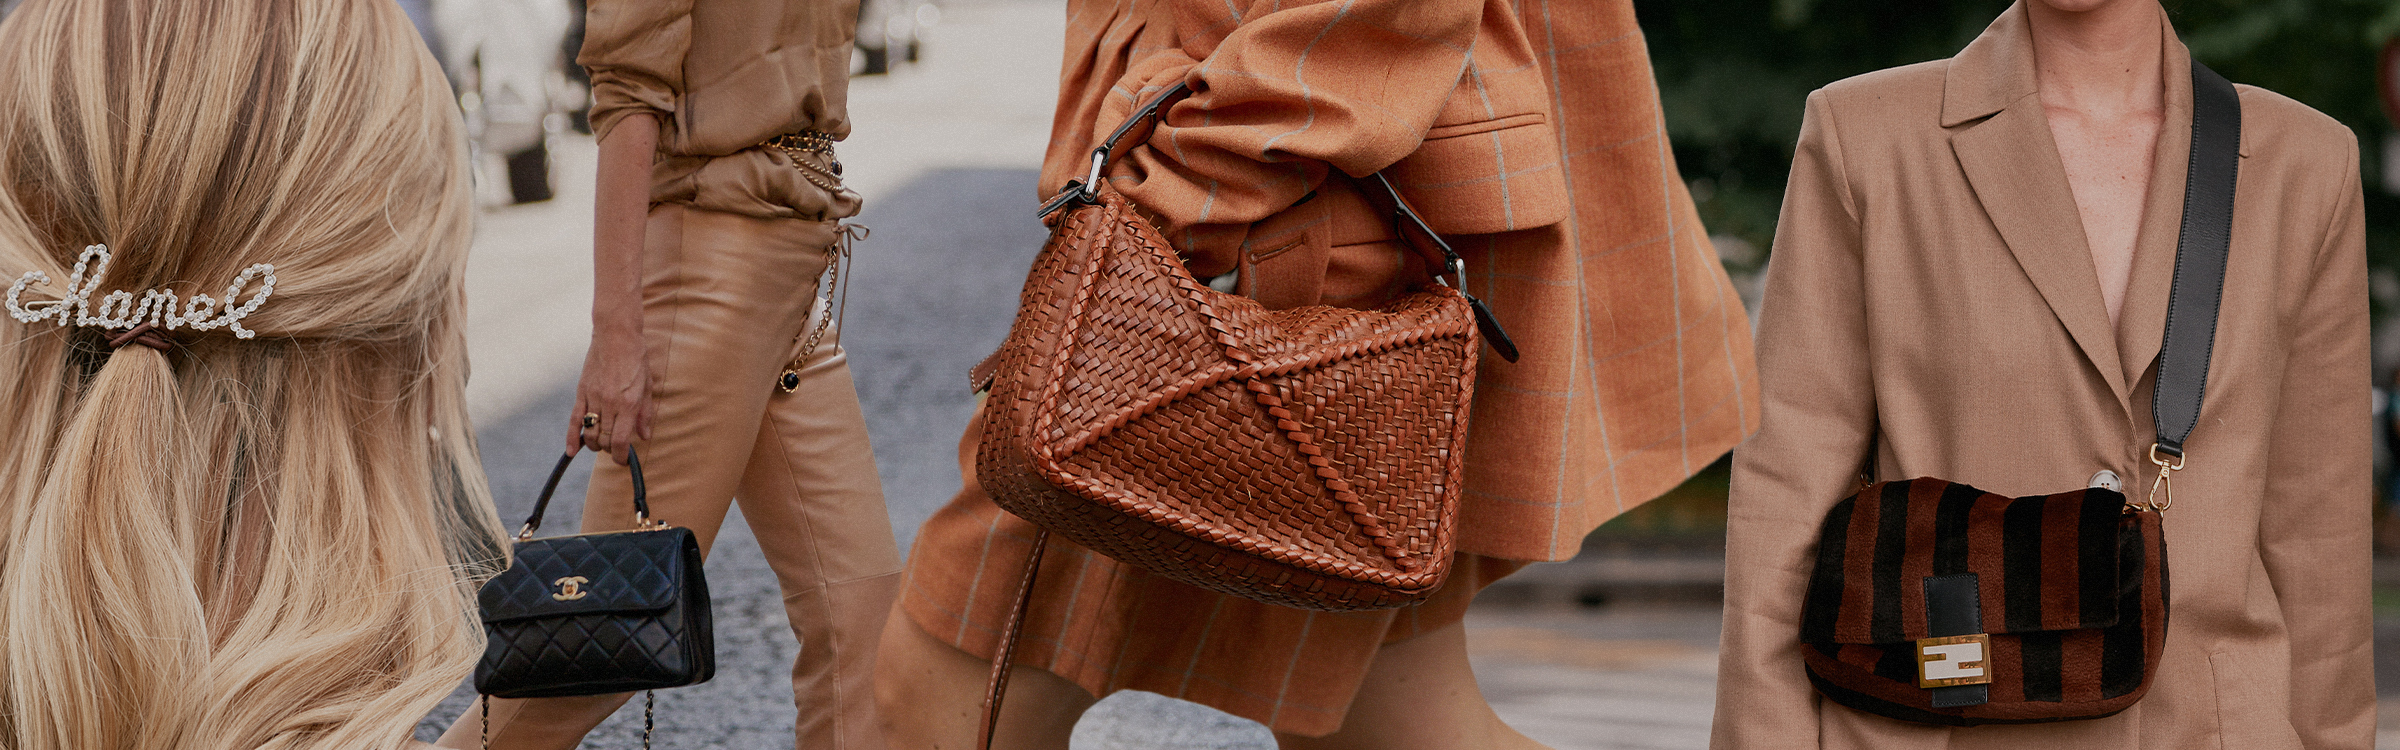 The Luxury Report: Where to Spend Your Shopping Money This Season